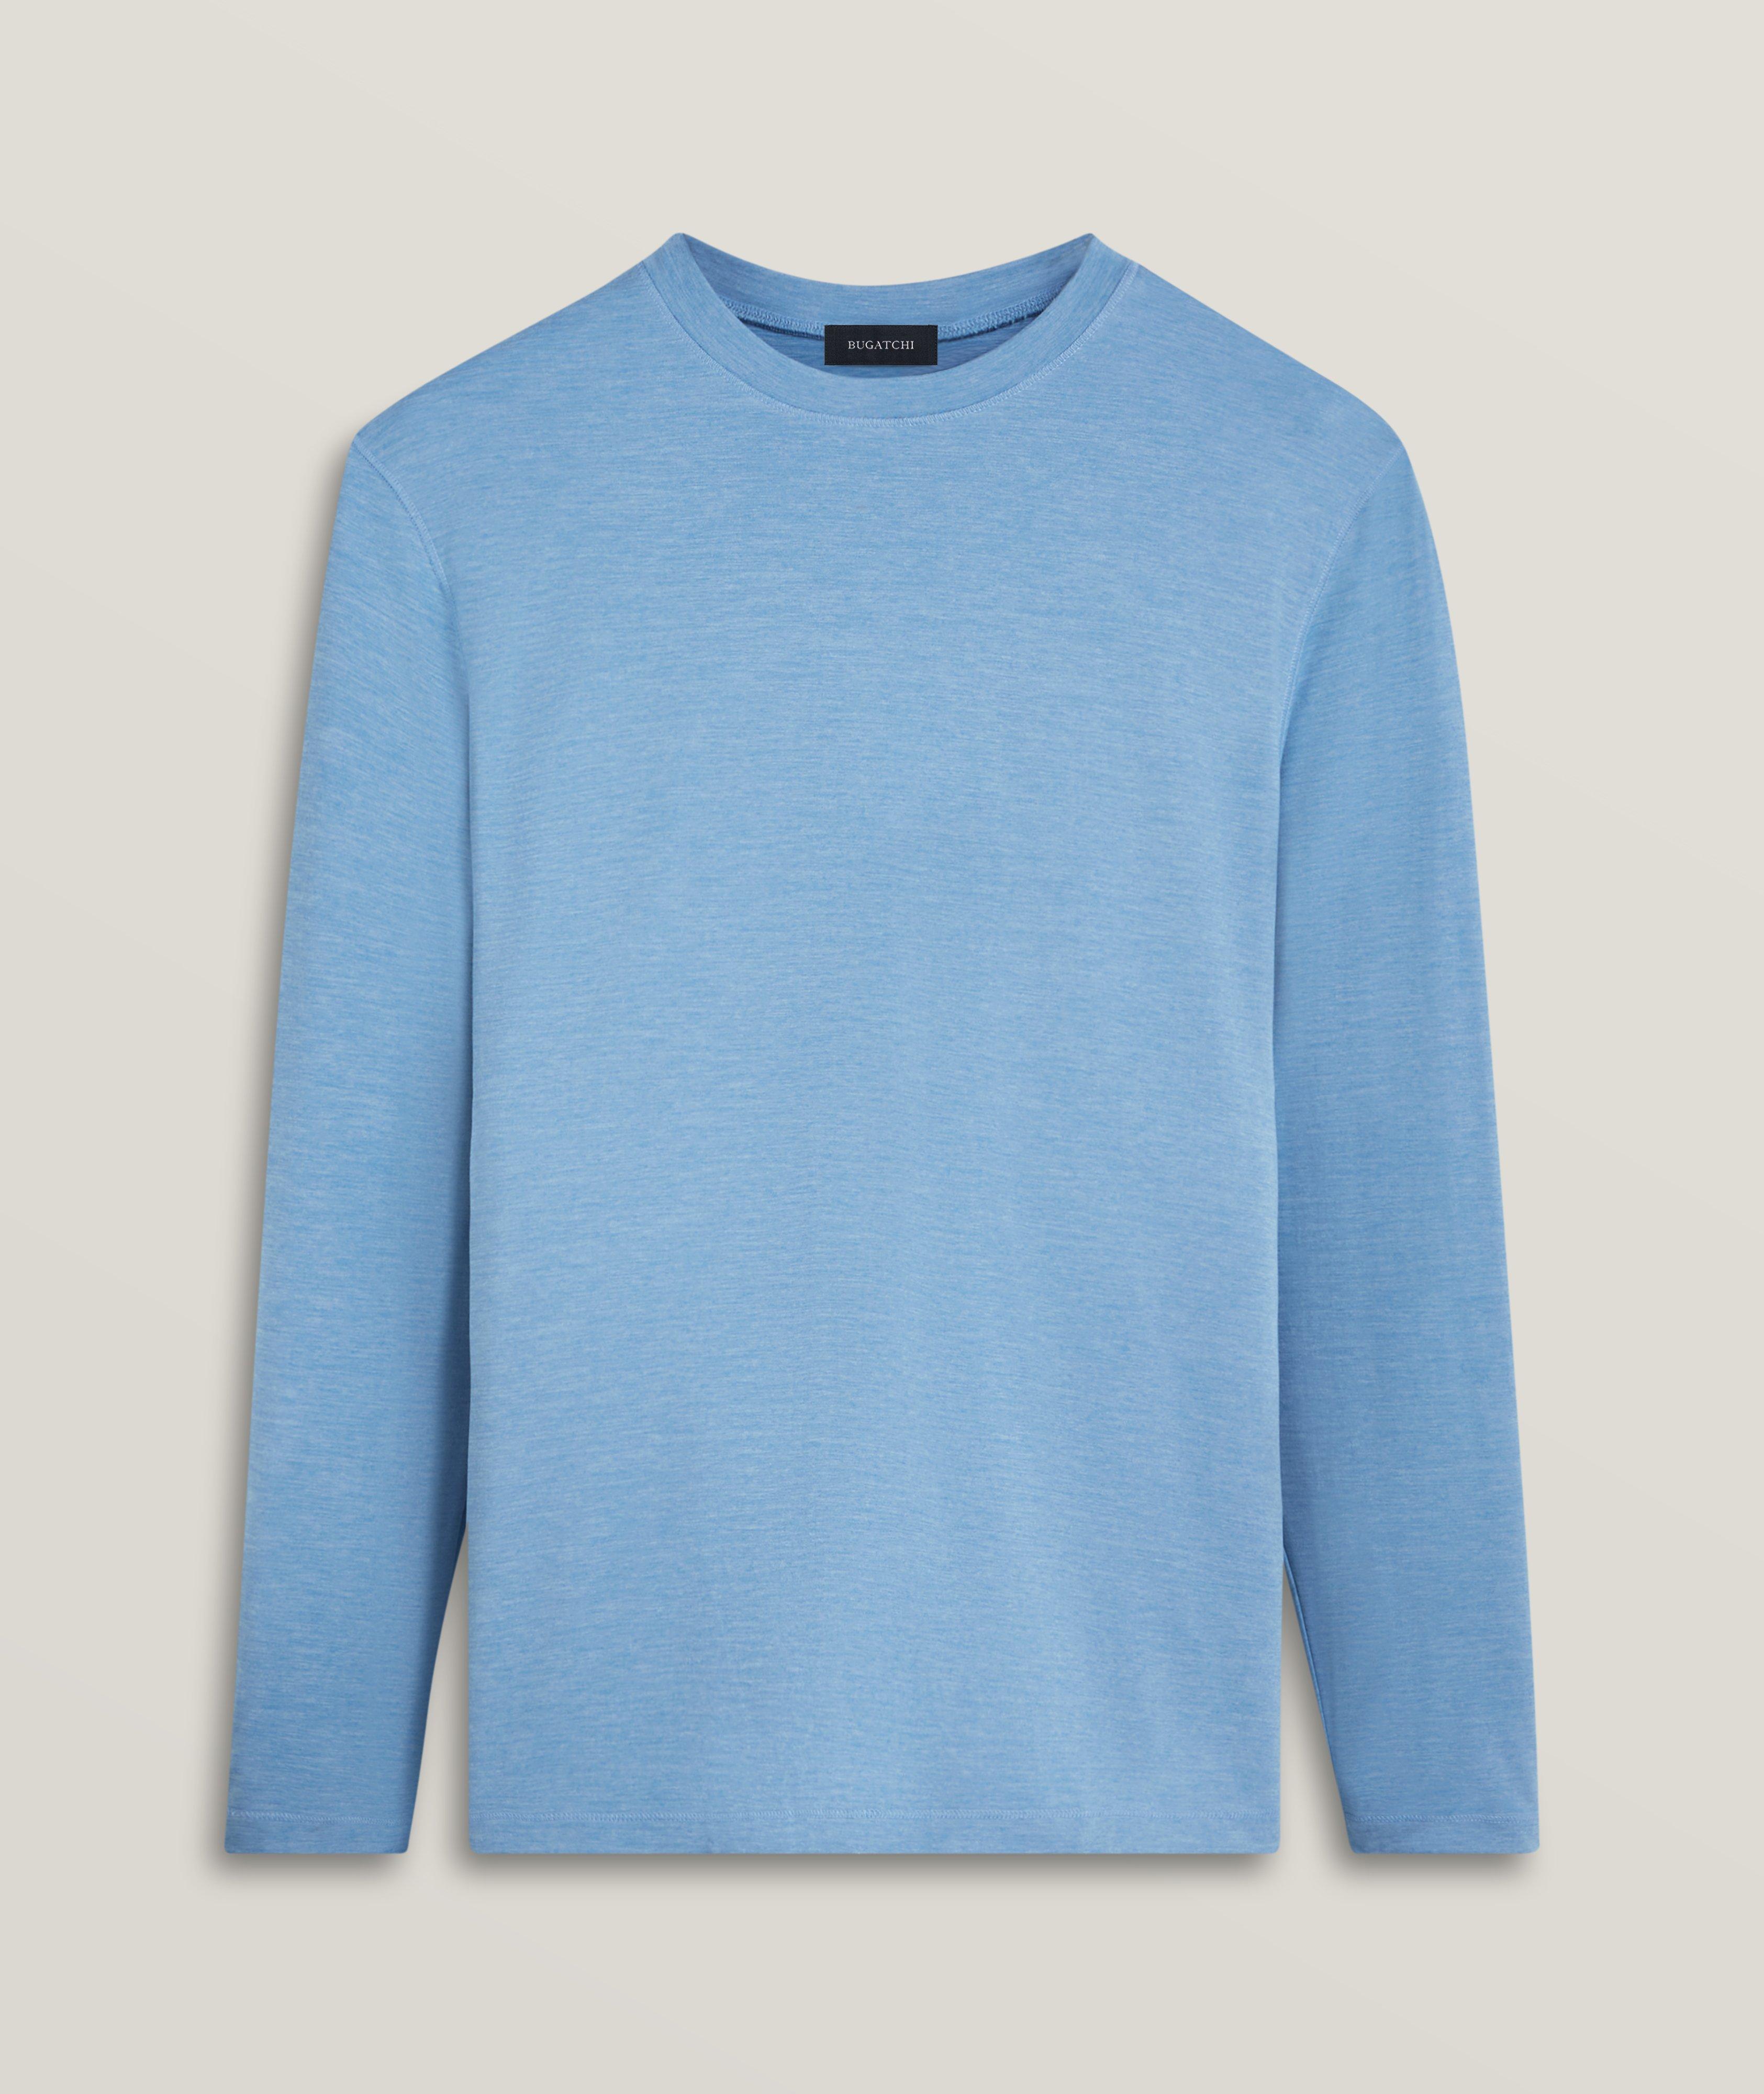 4-Way Stretch UV50 Performance Pullover image 0